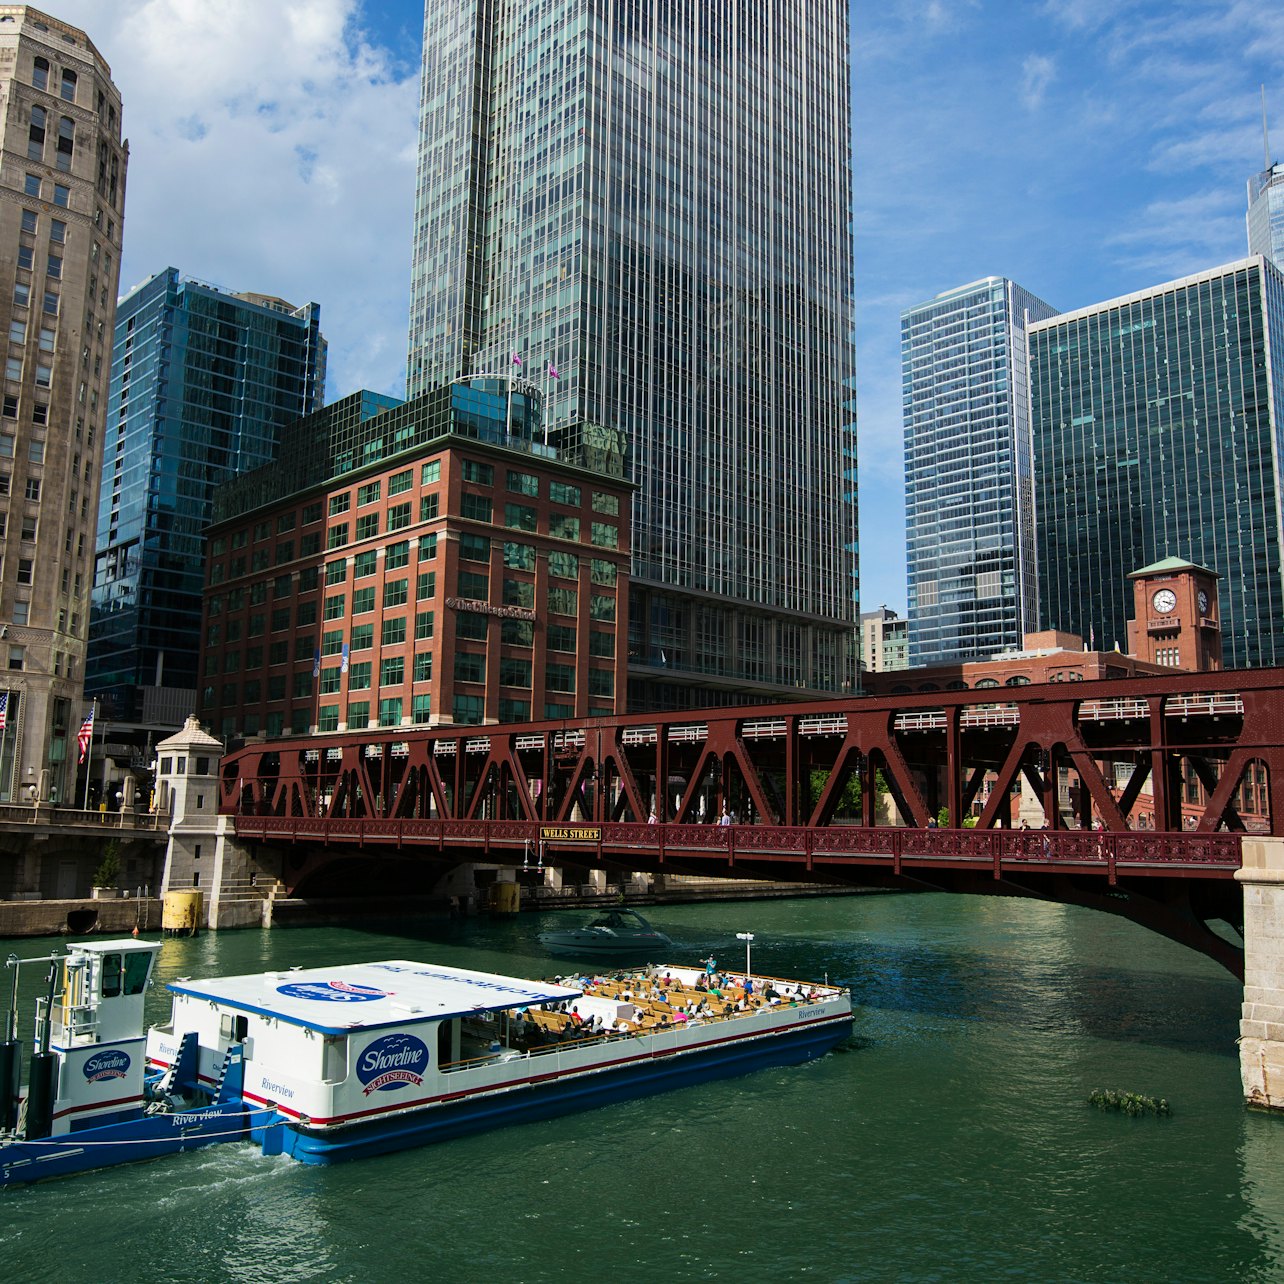 Chicago C3 CityPASS - Accommodations in Chicago